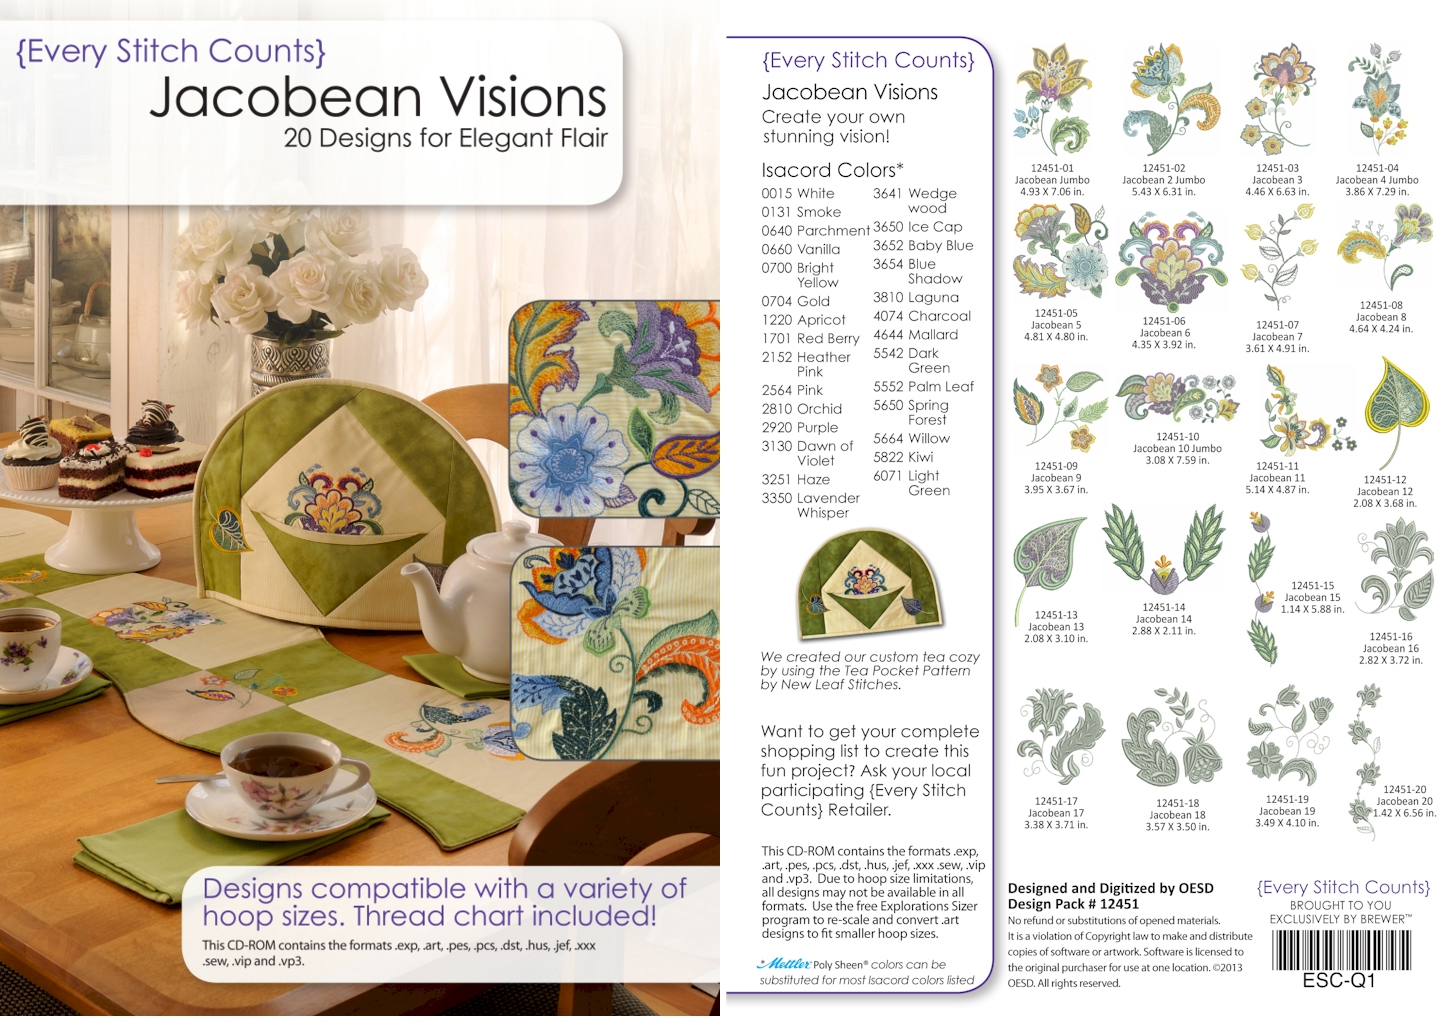 Jacobean Visions Embroidery Designs on CD-ROM by Every Stitch Counts